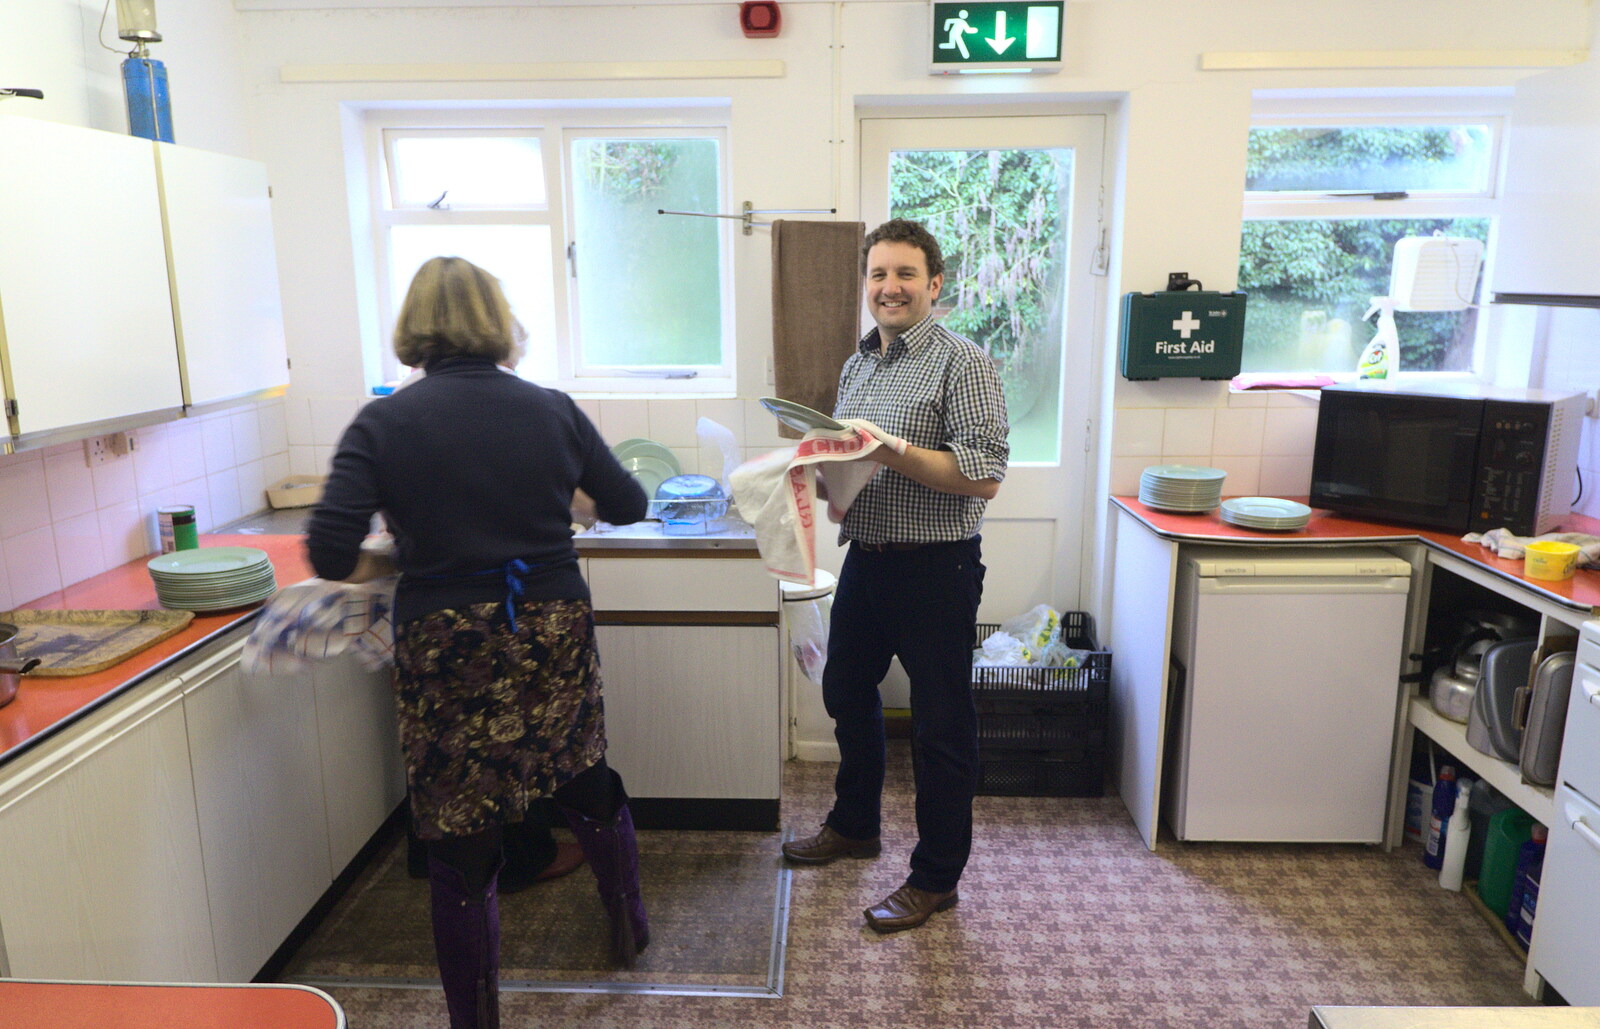 Clive helps with washing up from Sunday Lunch at the Village Hall, Brome, Suffolk - 3rd February 2013